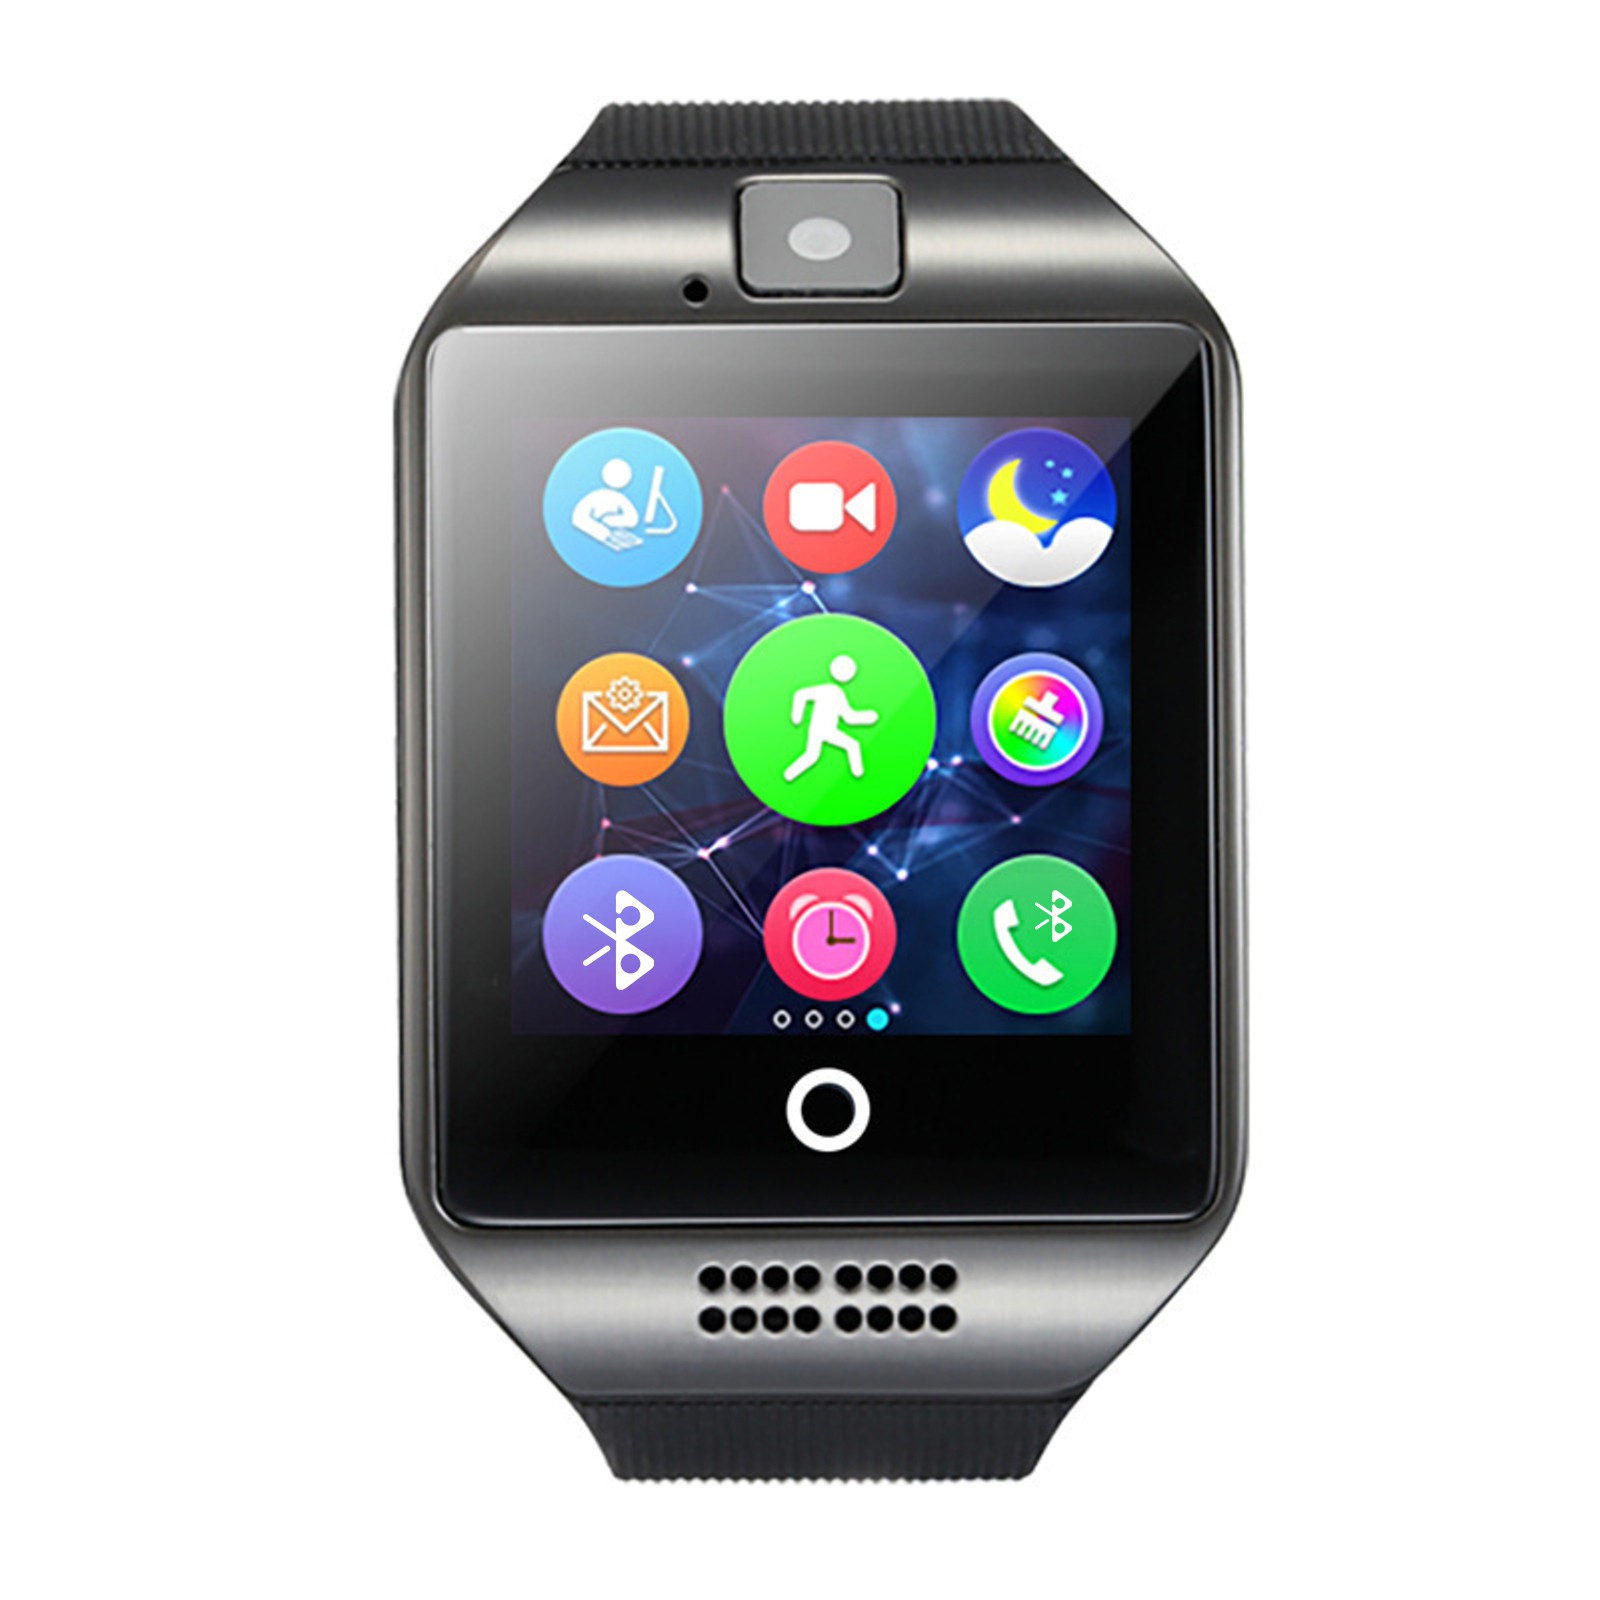 IN STOCK Intelligent Watch Black Bluetooth SIM TF Card Support Massage Camera Tracker Multifunctional Watch for Student Man Adult